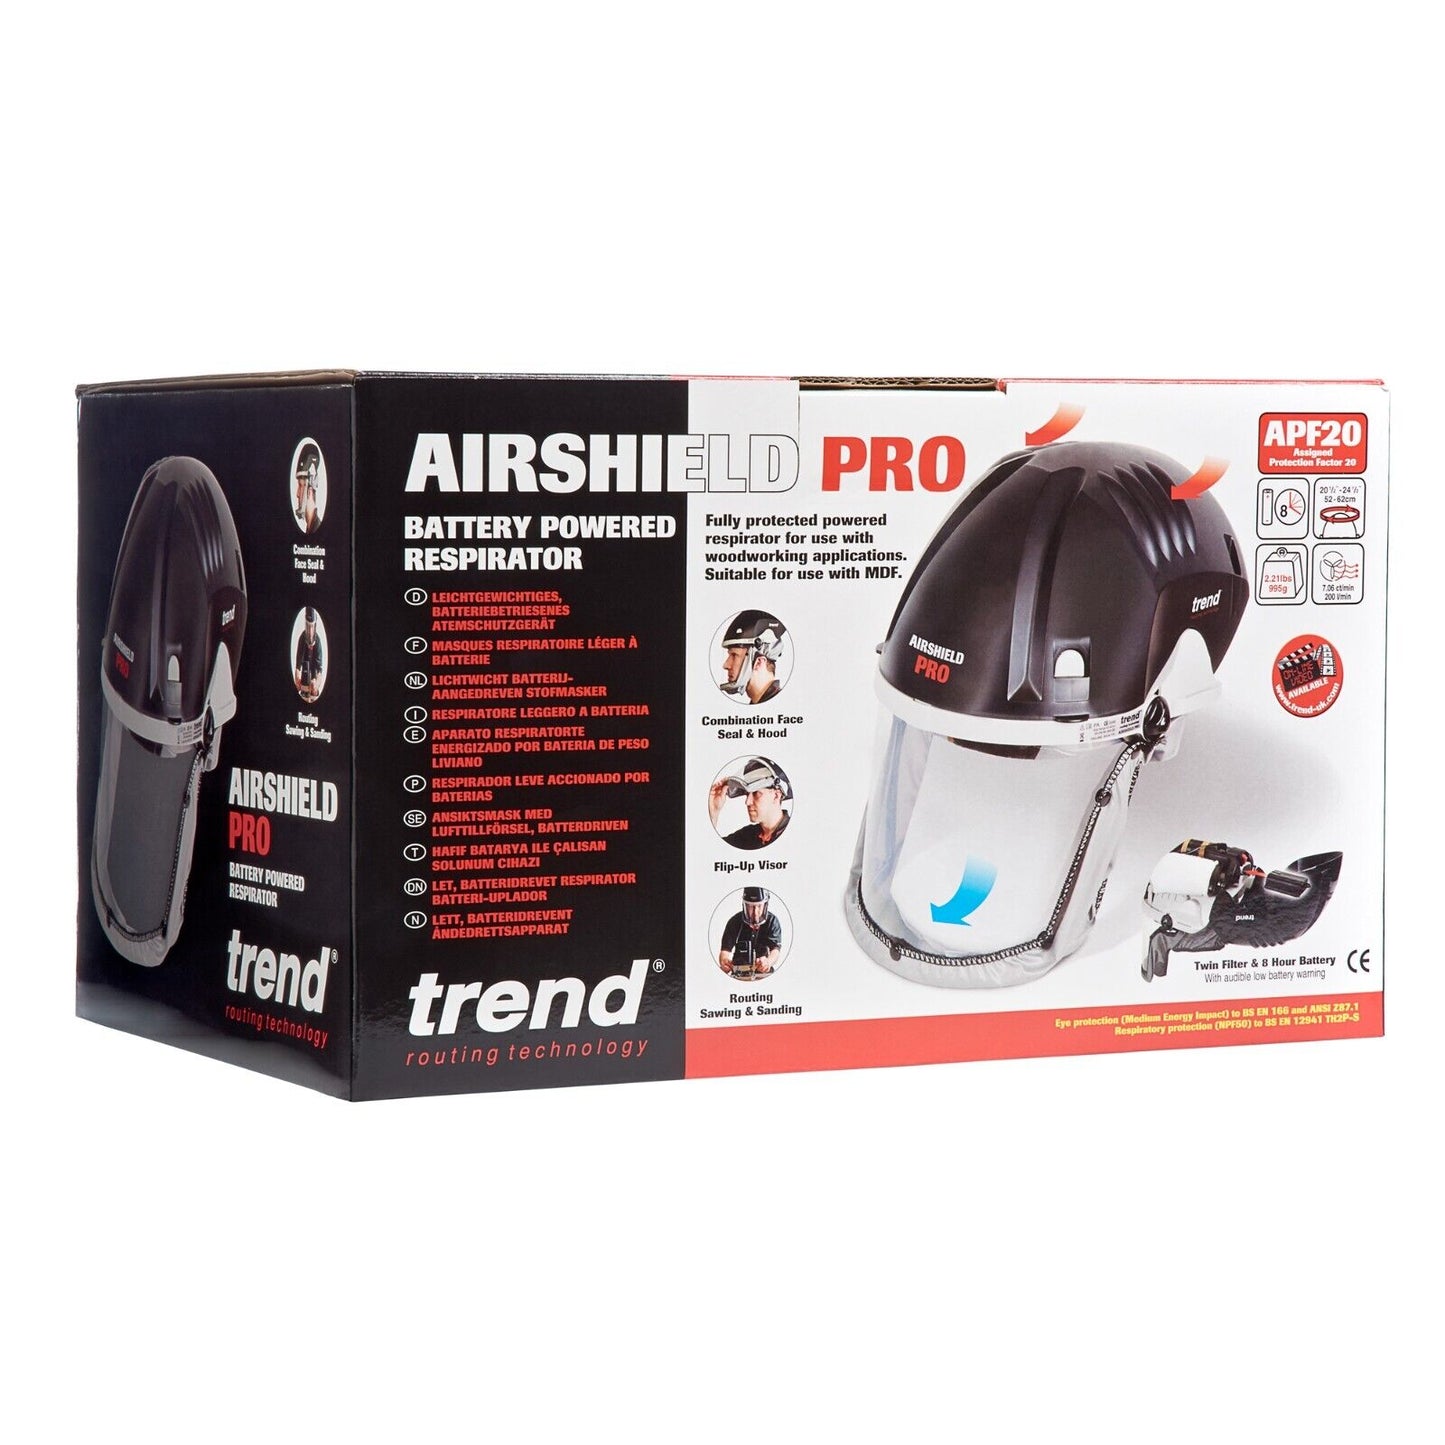 Trend AIR/PRO Airshield Pro Rechargeable Battery Powered Respirator APF20